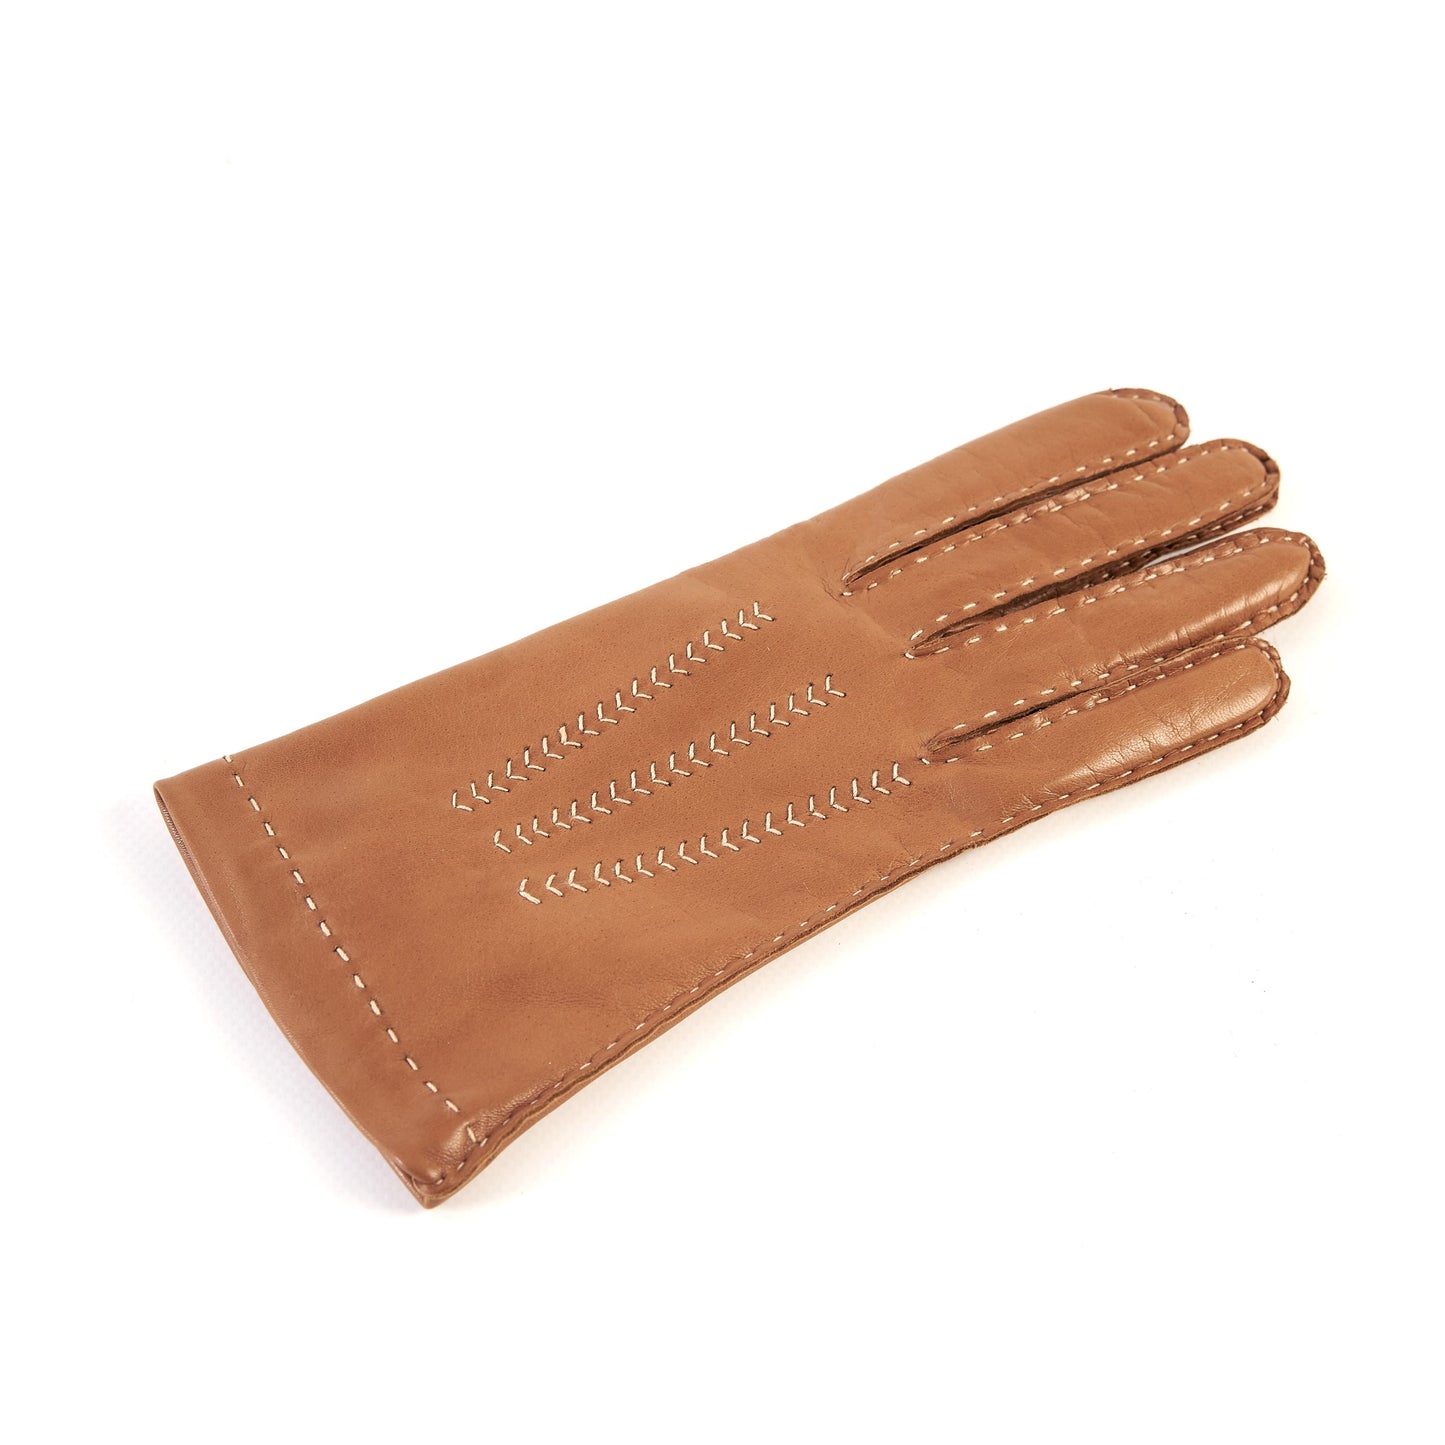 Women's classic camel nappa leather gloves entirely hand-sewn with cashmere lining